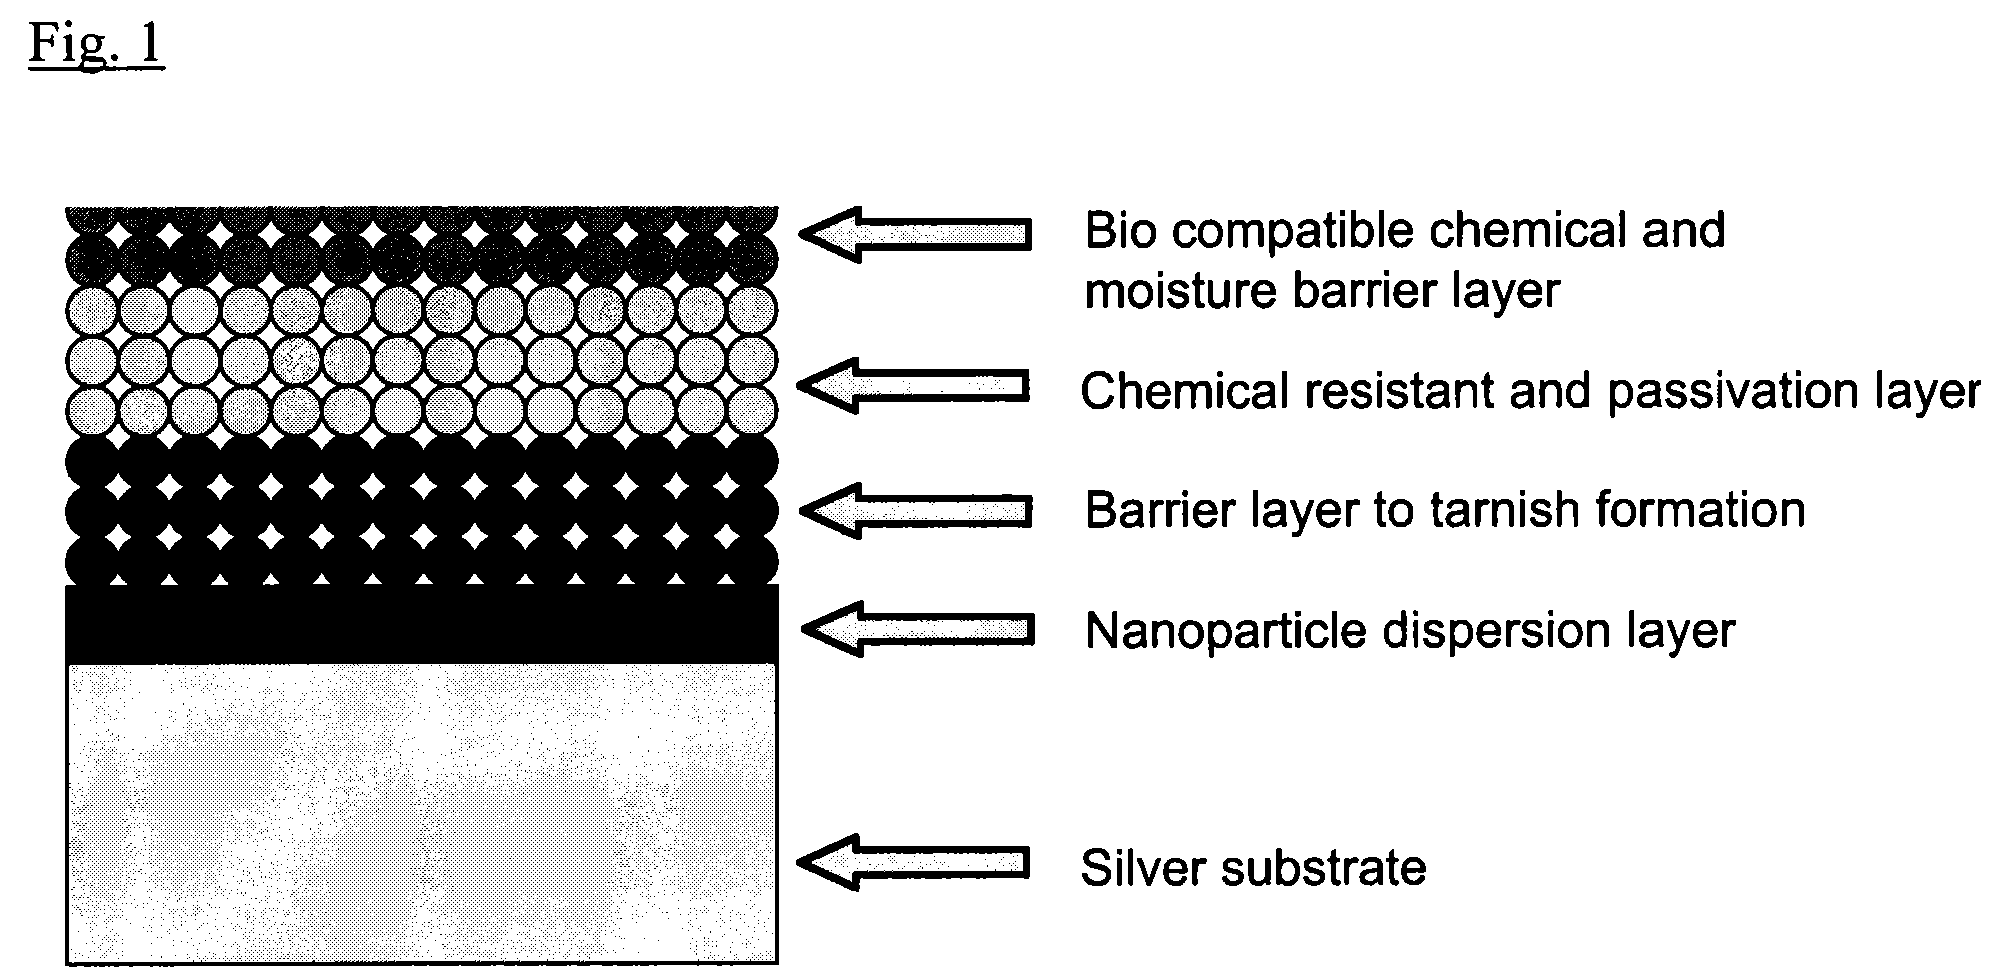 Method for imparting tarnish protection or tarnish protection with color appearance to silver, silver alloys, silver films, silver products and other non precious metals